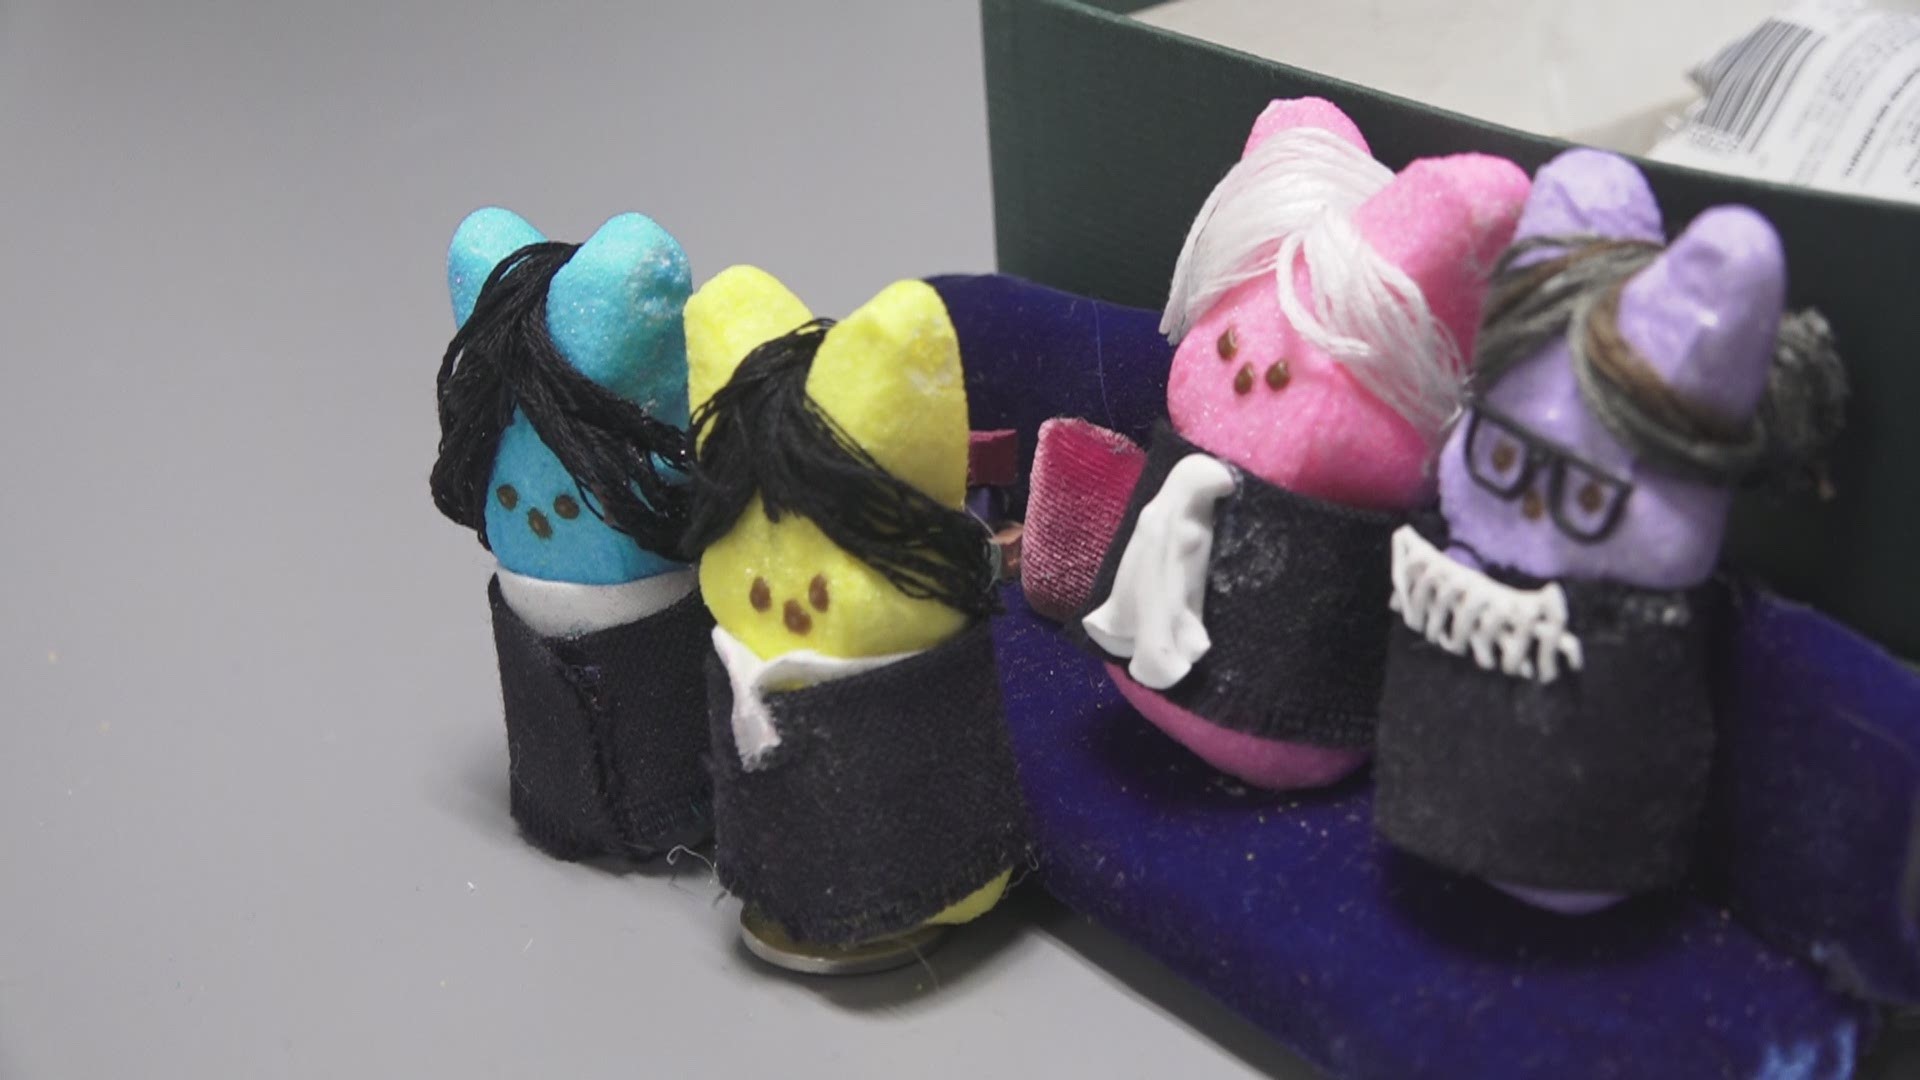 Constructing three-dimensional scenes starring peeps is a DC ~thing~ and Barbara Martin is keeping the tradition alive, with a #Resist twist.